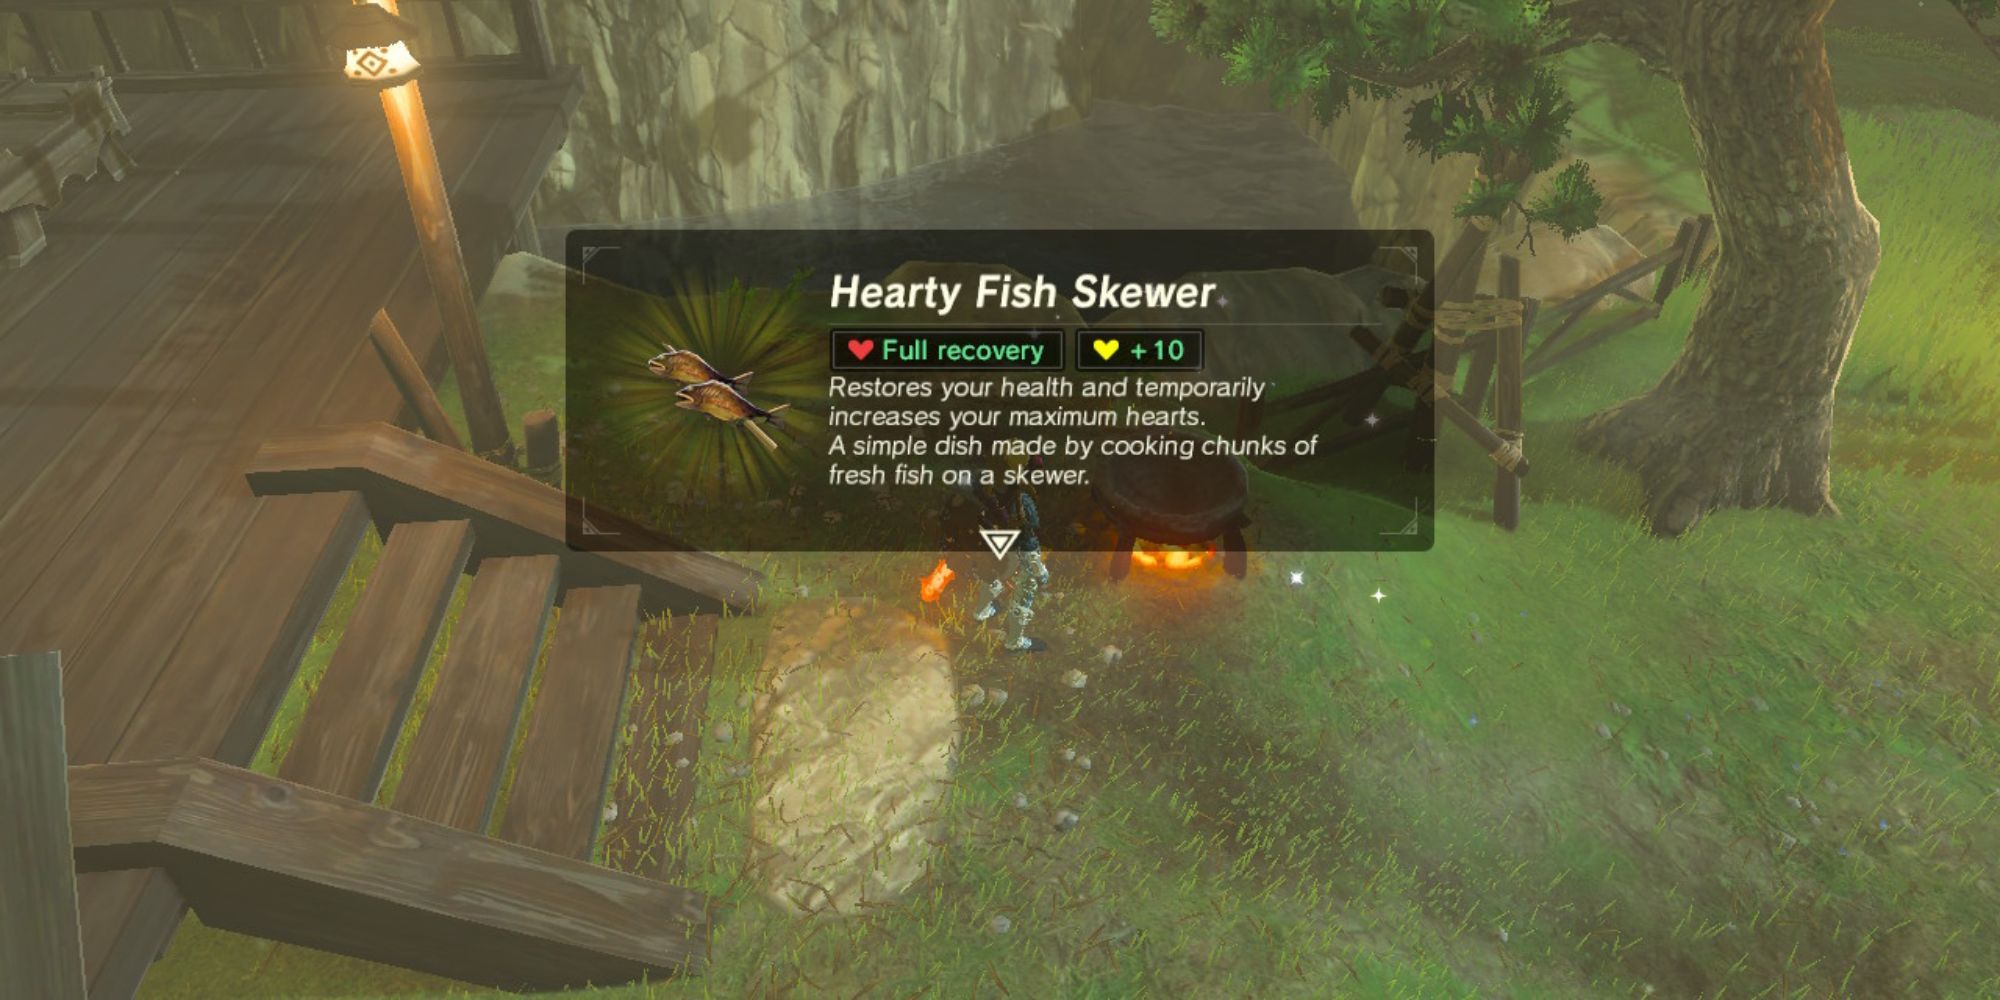 Hearty Fish Skewer in Breath of the Wild